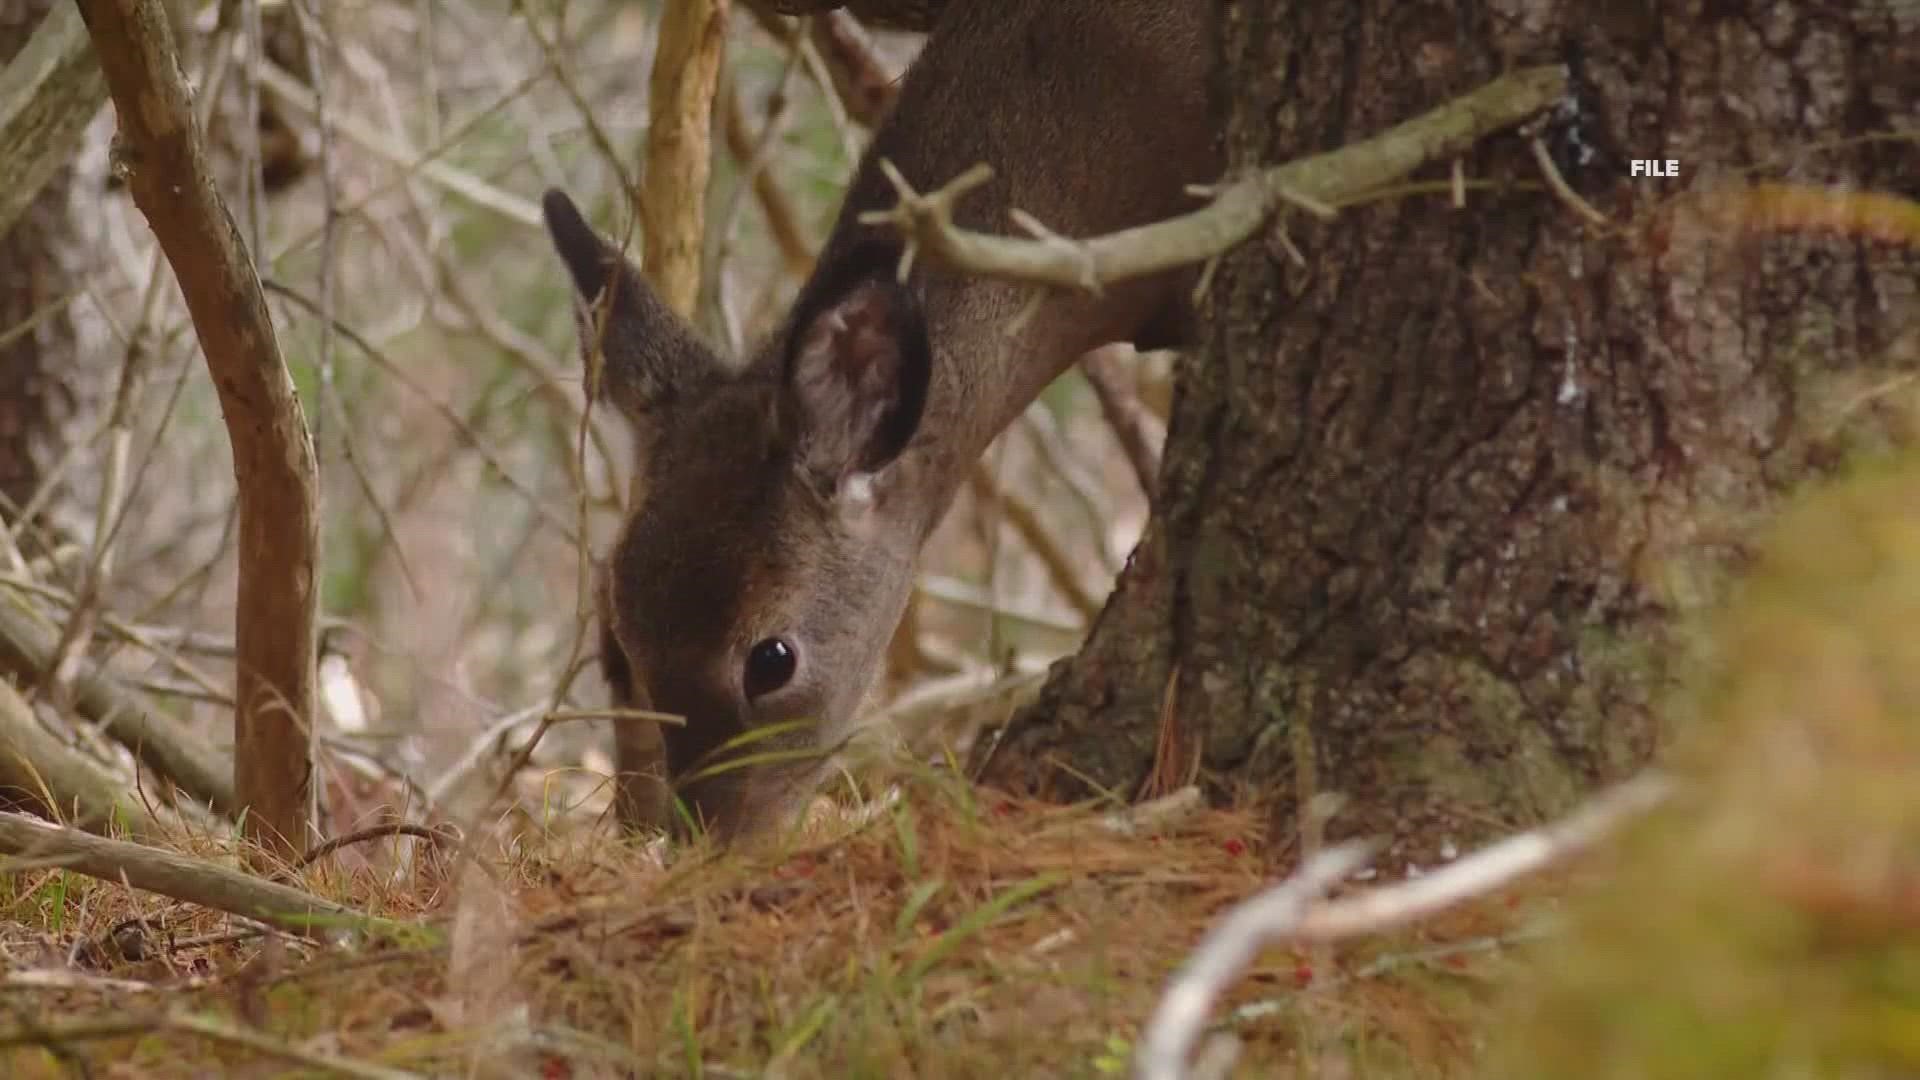 State wildlife biologists plan to expand testing of game animals following the discovery of high levels of the toxic chemicals known as PFAS in deer meat last week.